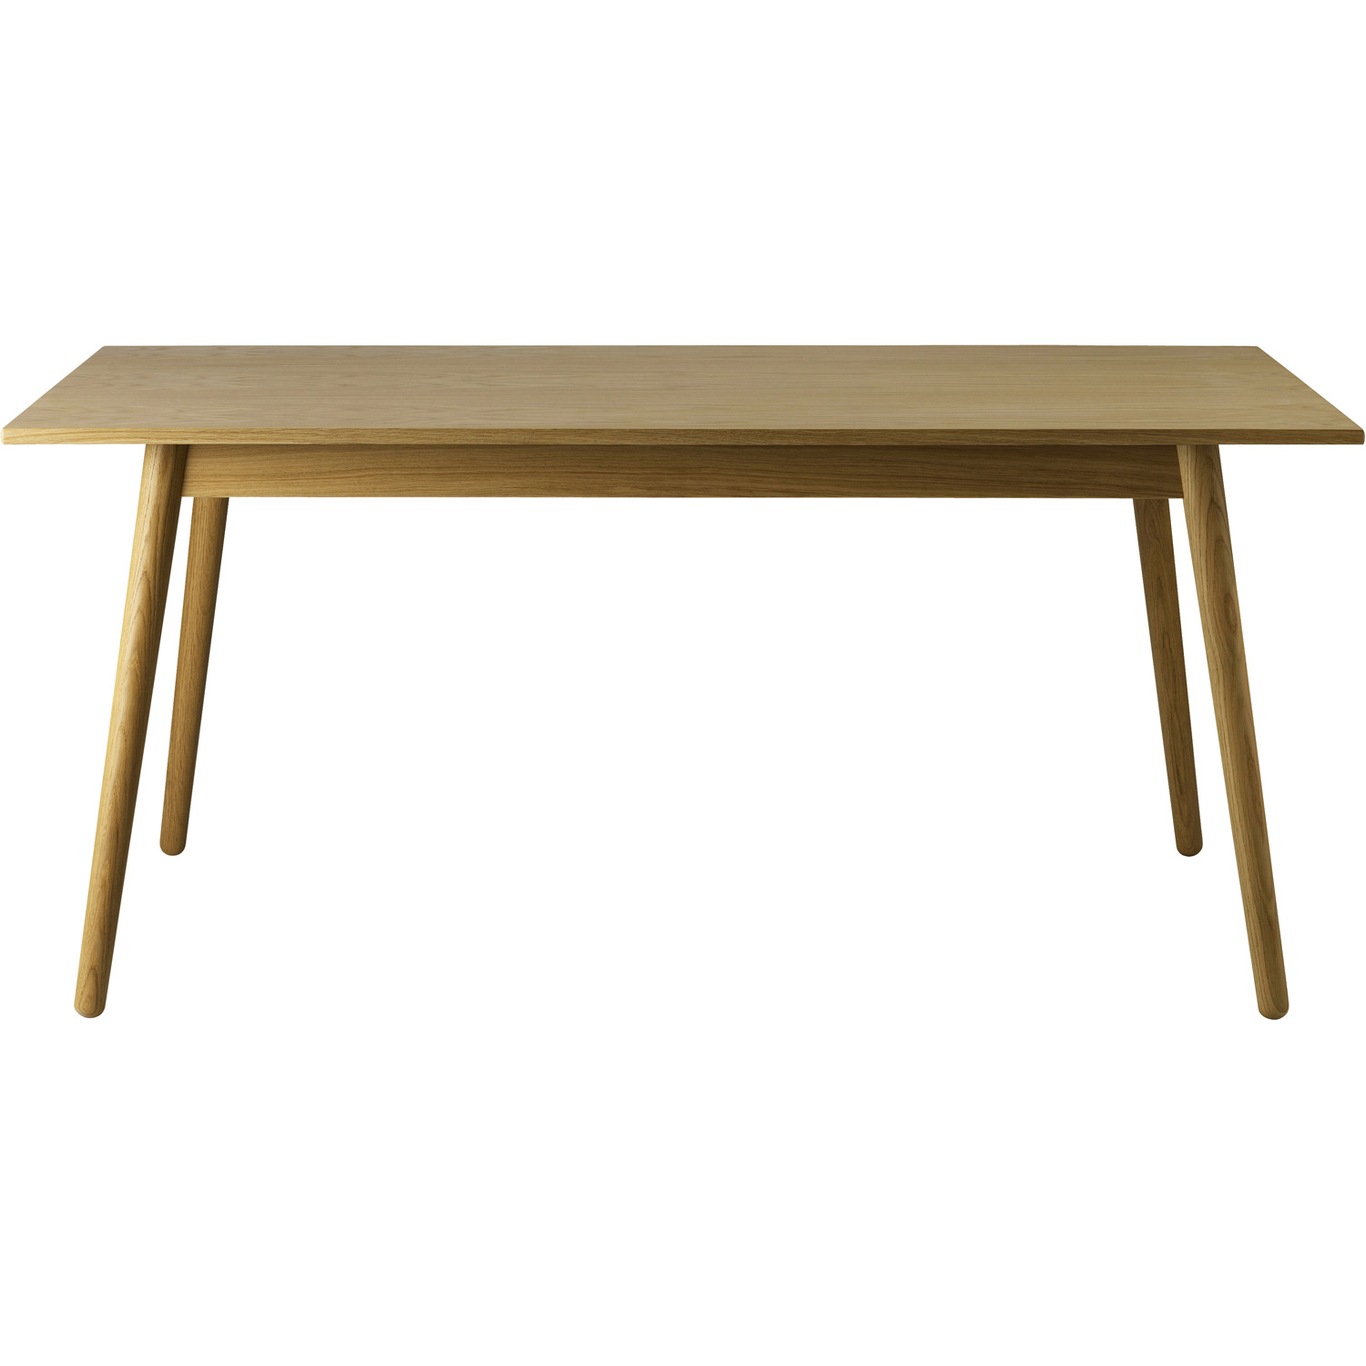 C35B Dining Table 160 cm, Lacquered Oak